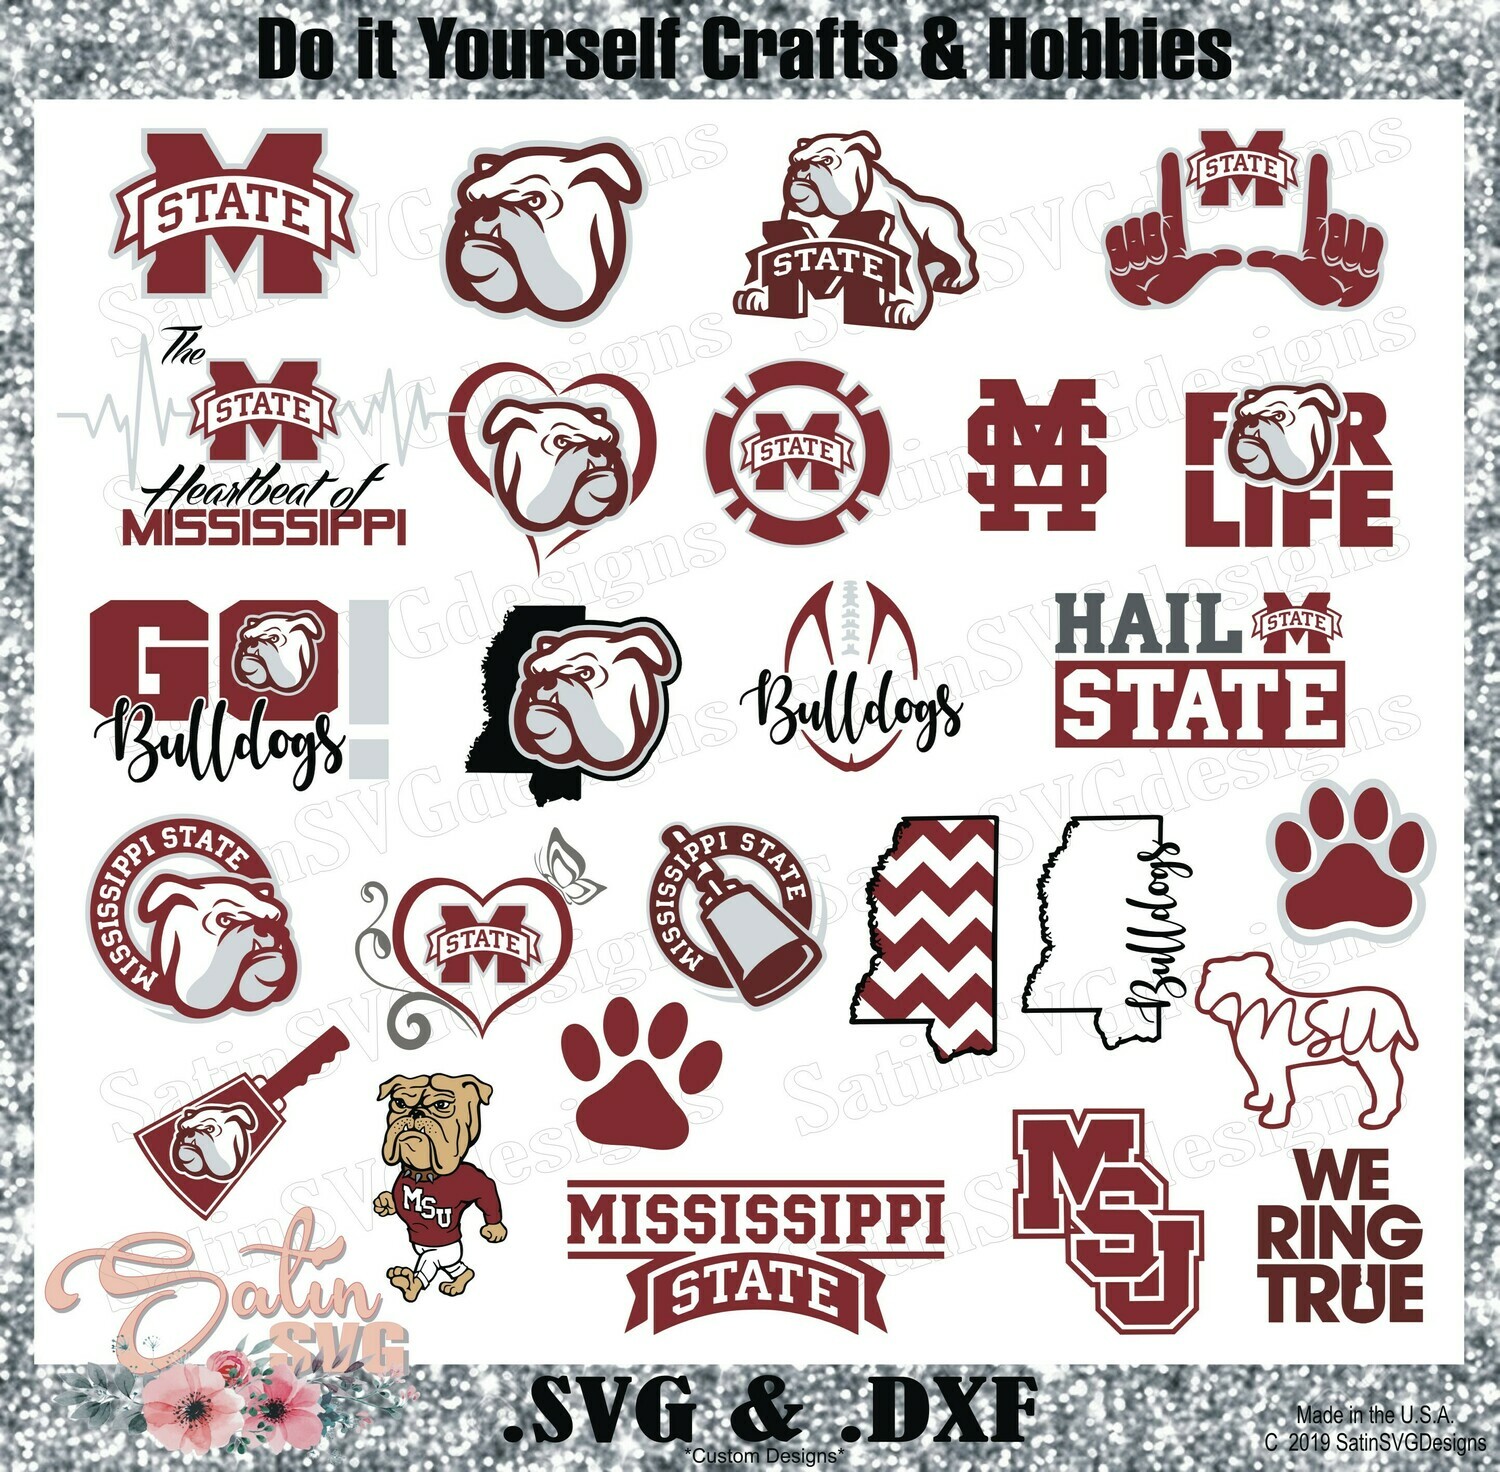 Mississippi State Bulldogs New Custom Central Florida University Designs Svg Files Cricut Silhouette Studio Digital Cut Files Infusible Ink